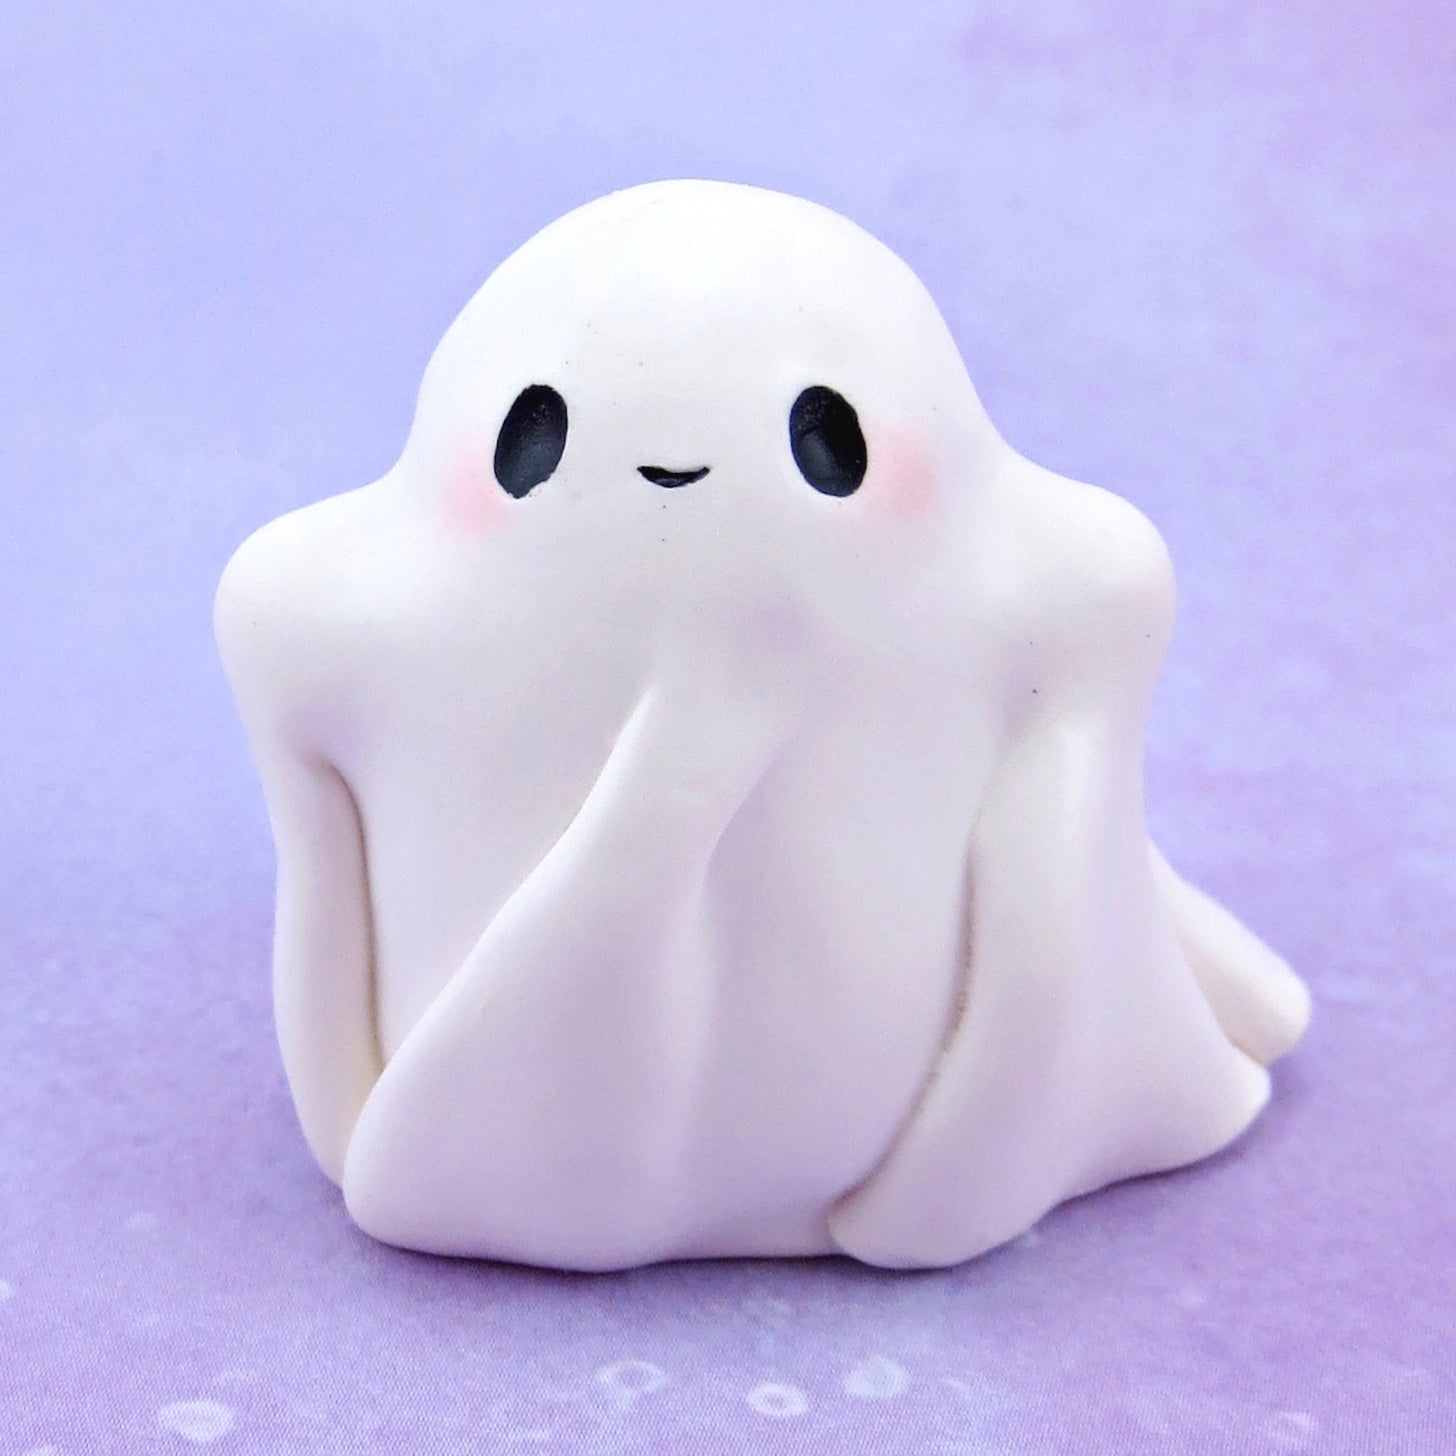 Little Smiley Ghostie Figurine - Polymer Clay Animals Fall and Halloween Collection